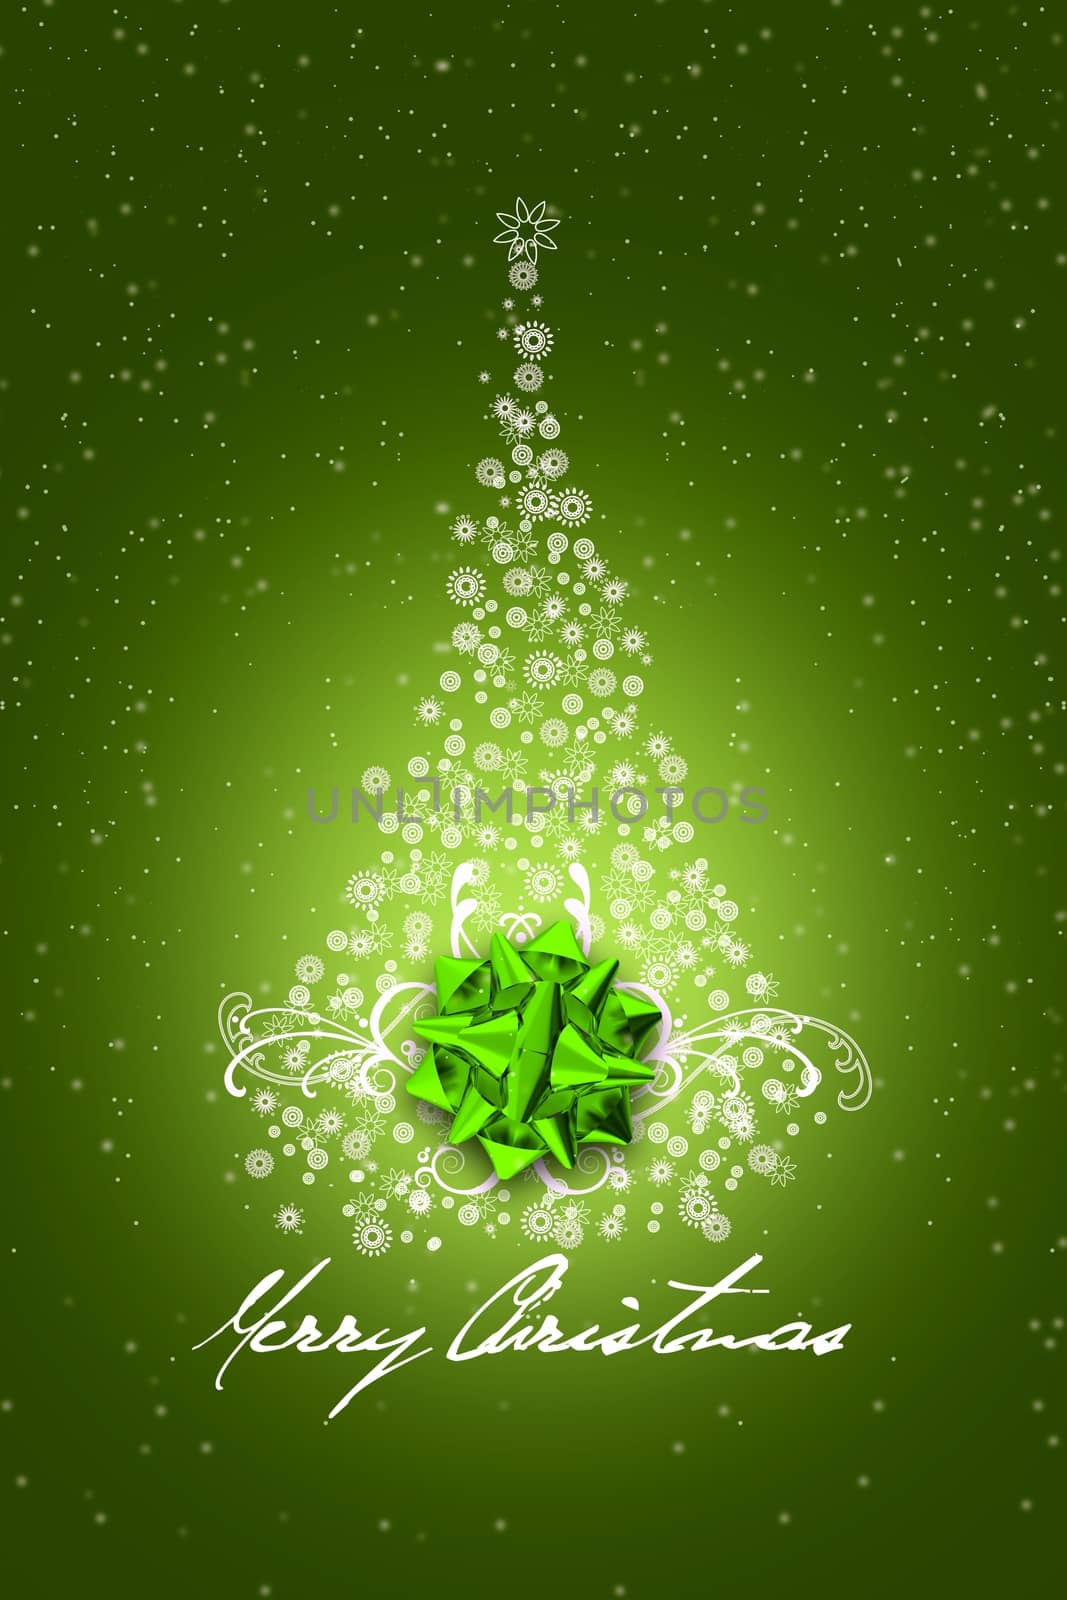 Green Christmas Design. Simple Creative Snowflakes Made Christmas Tree with Green Shiny Bow. Dark Green Background with Snow and Marry Christmas Wishes.